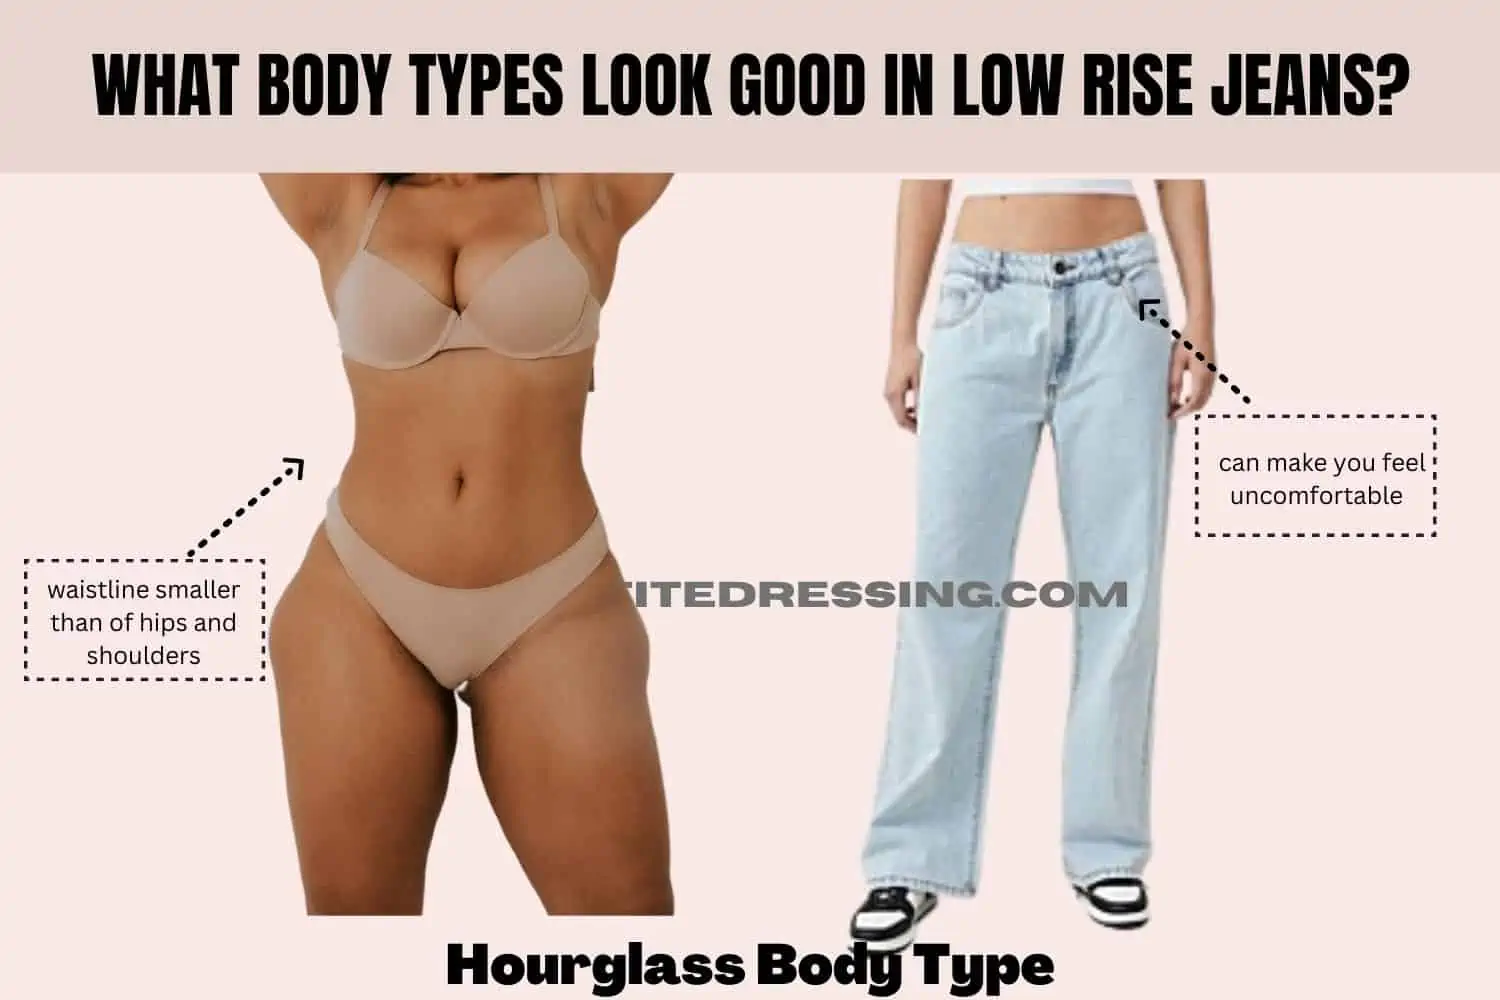 Is the trend of low waist jeans still popular? - Quora